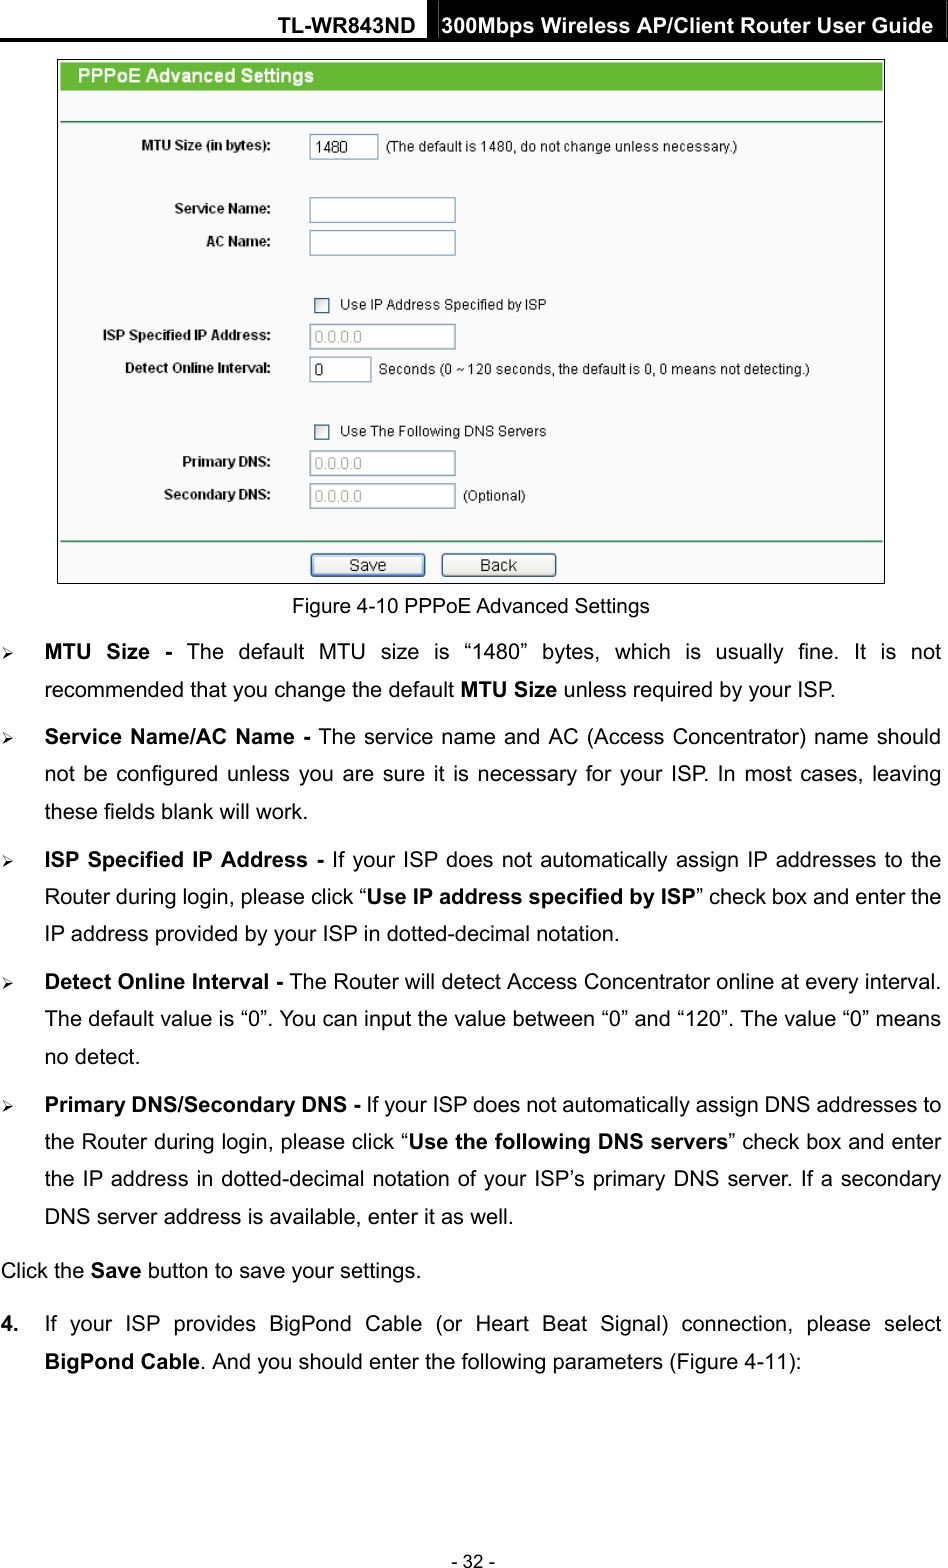 TL-WR843ND 300Mbps Wireless AP/Client Router User Guide - 32 -  Figure 4-10 PPPoE Advanced Settings  MTU Size - The default MTU size is “1480” bytes, which is usually fine. It is not recommended that you change the default MTU Size unless required by your ISP.  Service Name/AC Name - The service name and AC (Access Concentrator) name should not be configured unless you are sure it is necessary for your ISP. In most cases, leaving these fields blank will work.  ISP Specified IP Address - If your ISP does not automatically assign IP addresses to the Router during login, please click “Use IP address specified by ISP” check box and enter the IP address provided by your ISP in dotted-decimal notation.  Detect Online Interval - The Router will detect Access Concentrator online at every interval. The default value is “0”. You can input the value between “0” and “120”. The value “0” means no detect.  Primary DNS/Secondary DNS - If your ISP does not automatically assign DNS addresses to the Router during login, please click “Use the following DNS servers” check box and enter the IP address in dotted-decimal notation of your ISP’s primary DNS server. If a secondary DNS server address is available, enter it as well. Click the Save button to save your settings. 4.  If your ISP provides BigPond Cable (or Heart Beat Signal) connection, please select BigPond Cable. And you should enter the following parameters (Figure 4-11): 